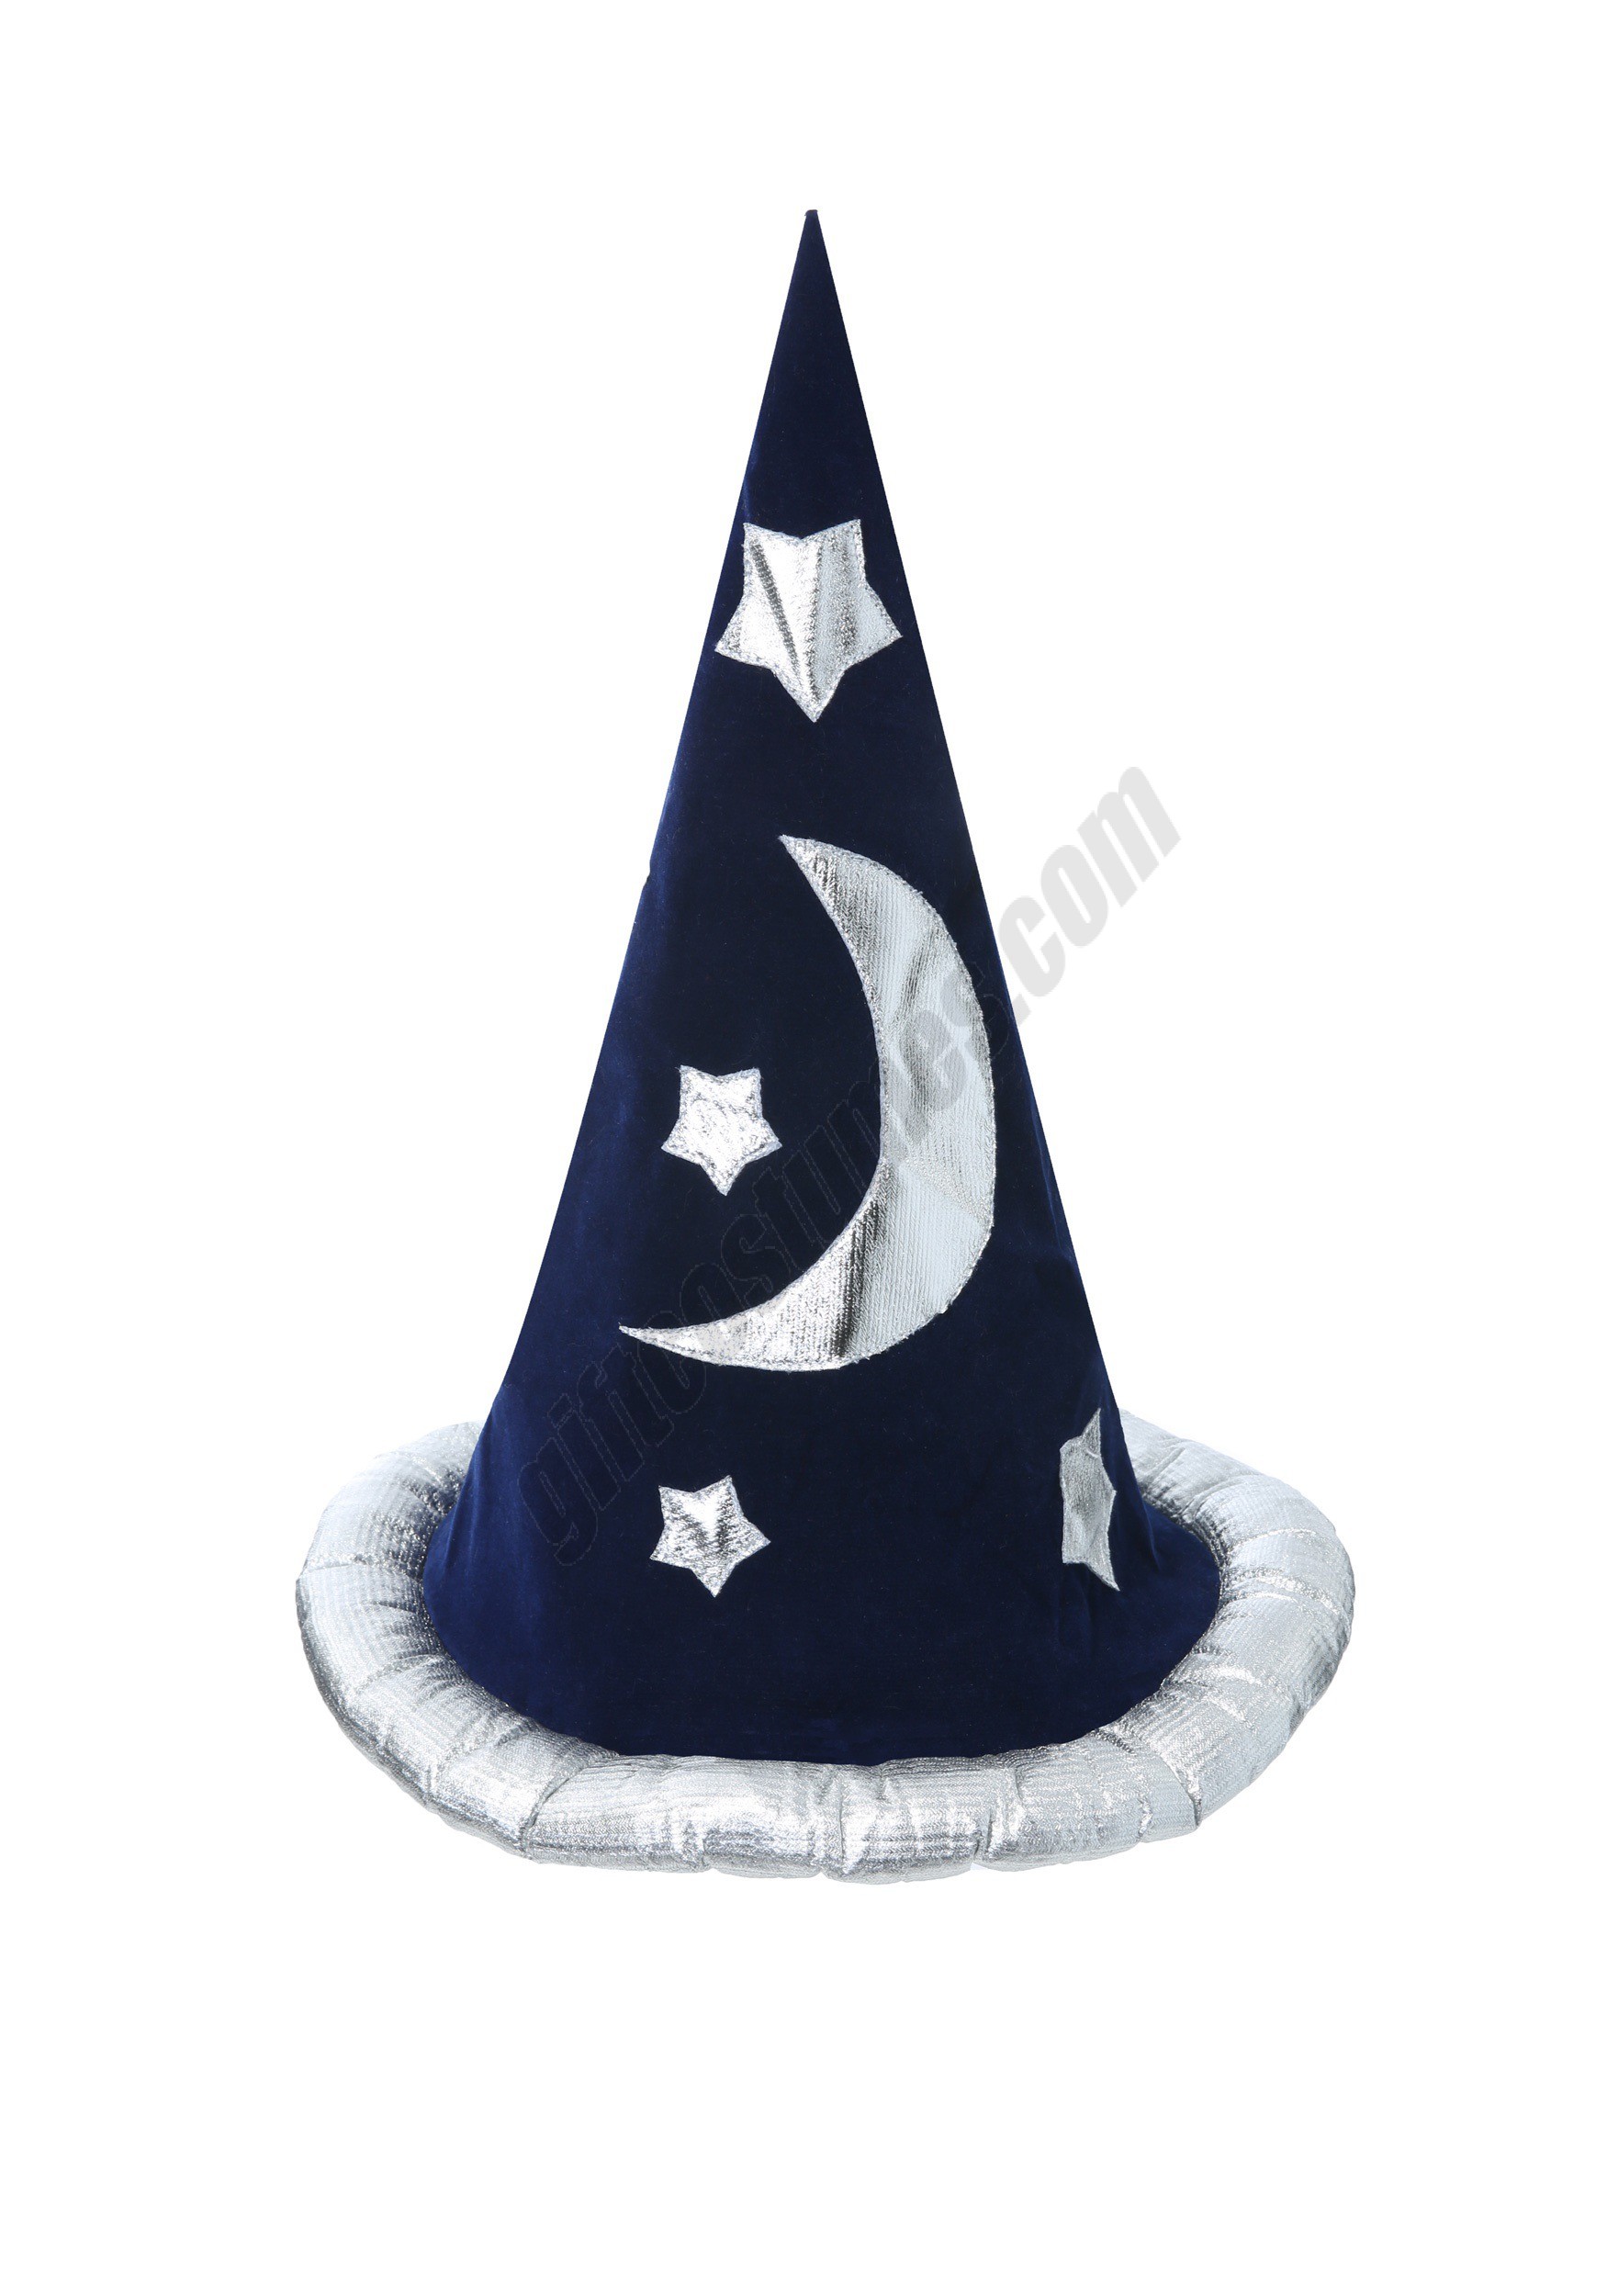 Wizard Adult Hat Promotions - Wizard Adult Hat Promotions